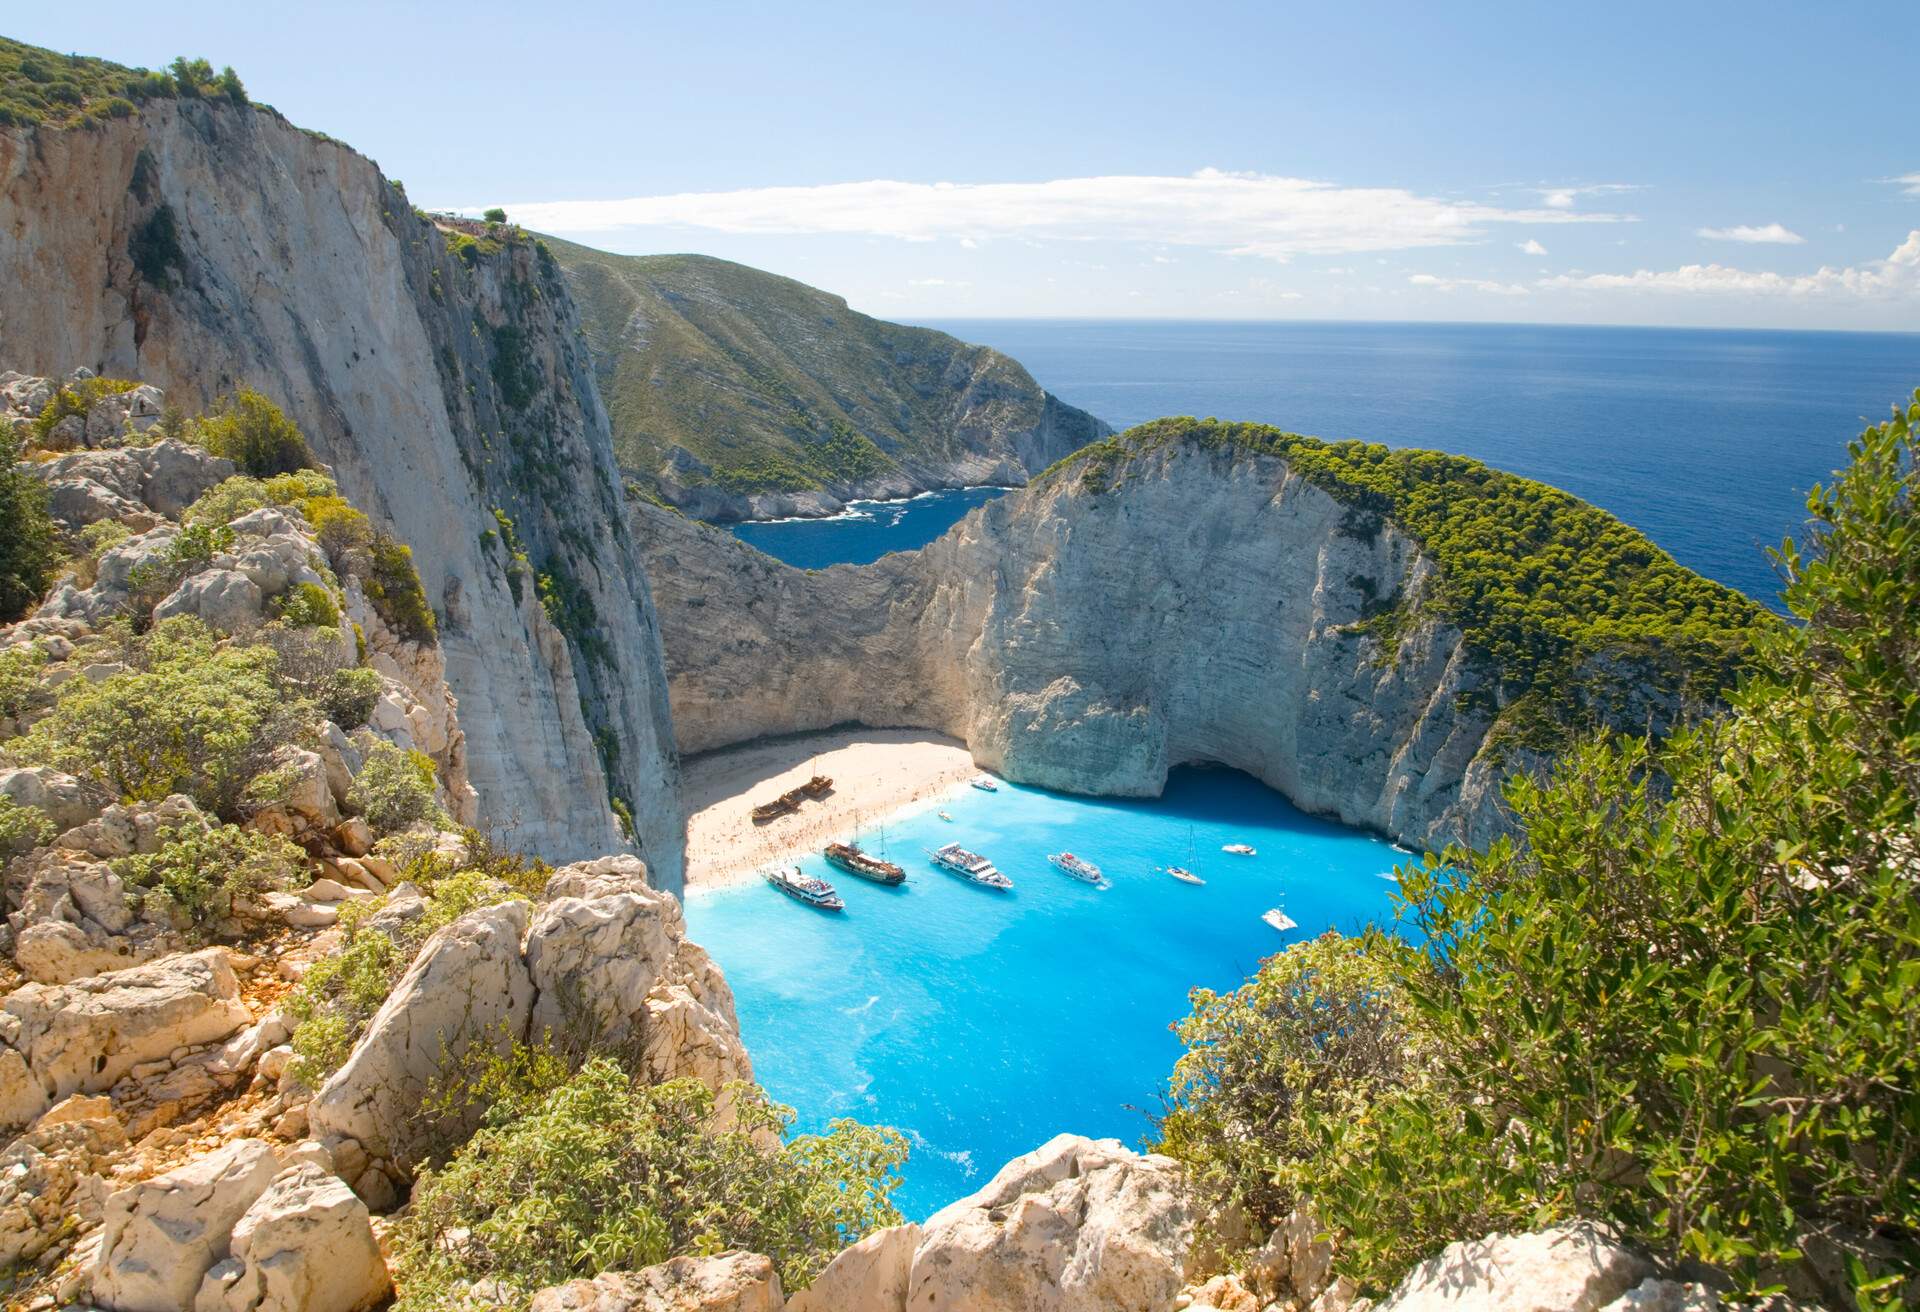 View from clifftop over the turquoise waters of Navagio Bay (aka Shipwreck Bay, Smugglers Cove), pleasure boats anchored off the beach, near Anafonitria, Zakynthos (aka Zante, Zakinthos), Ionian Islands, Greece, Europe.